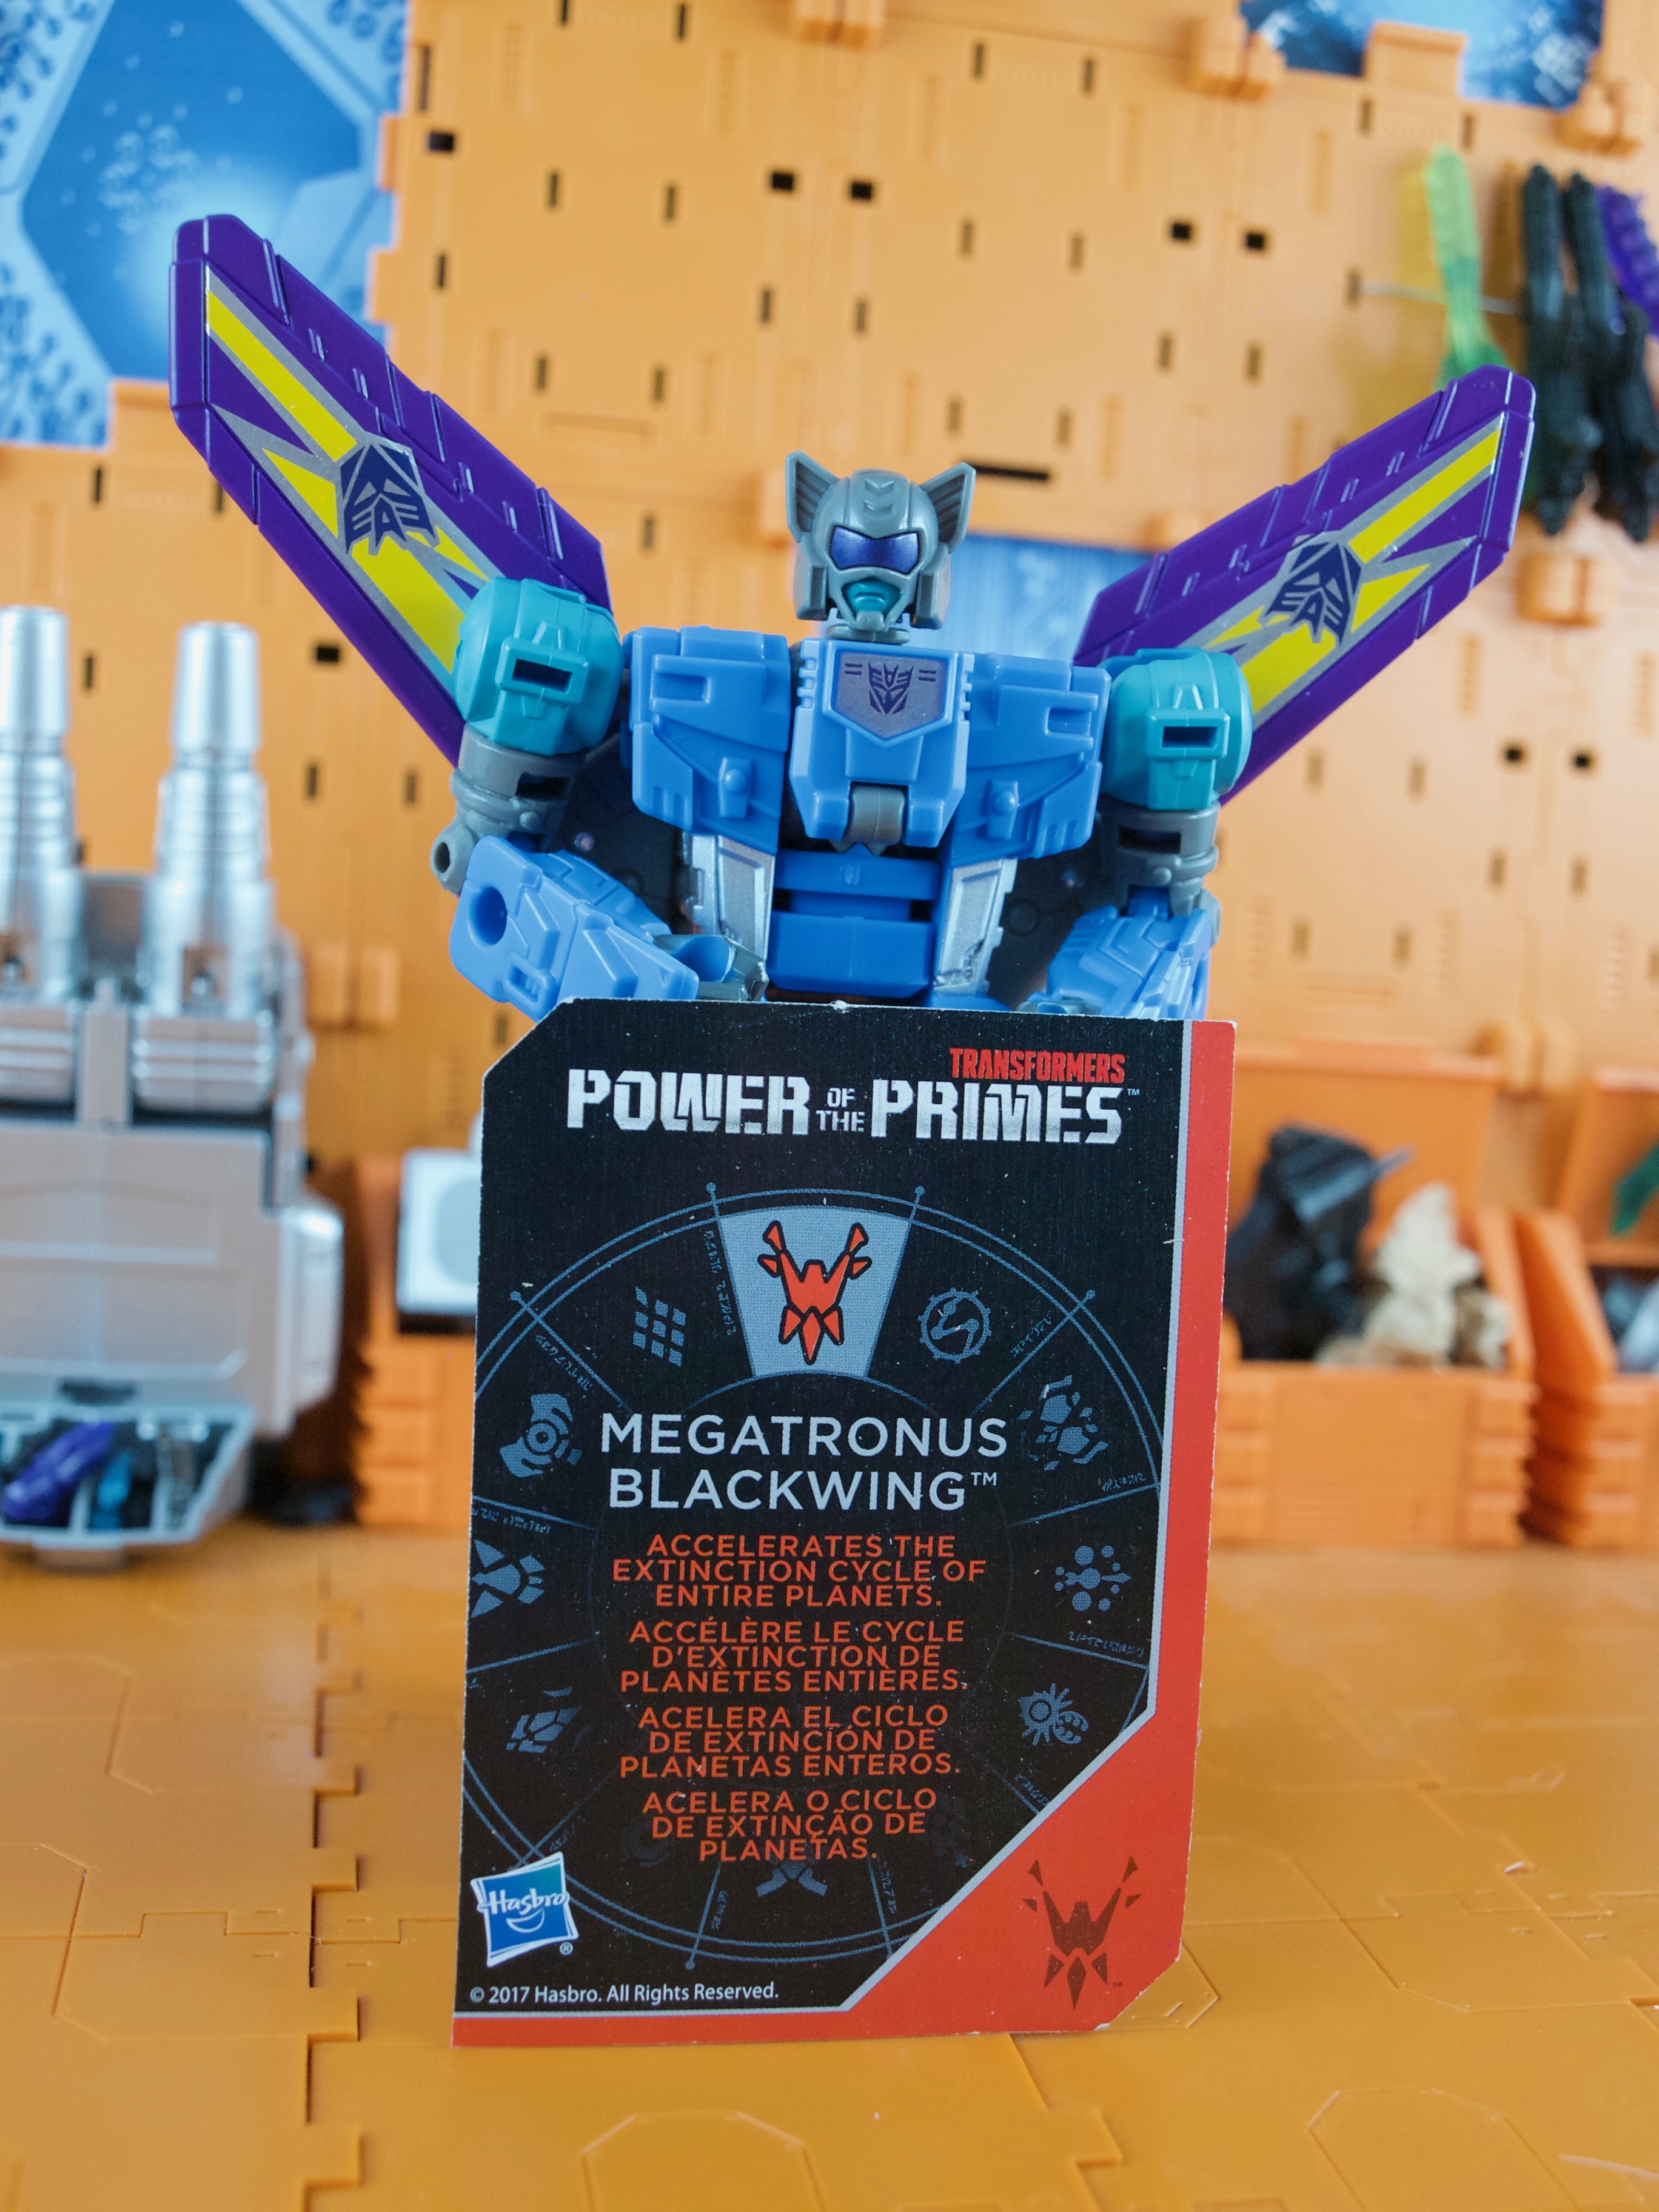 Megatronus Blackwing: Accelerates the extinction cycle of entire planets.